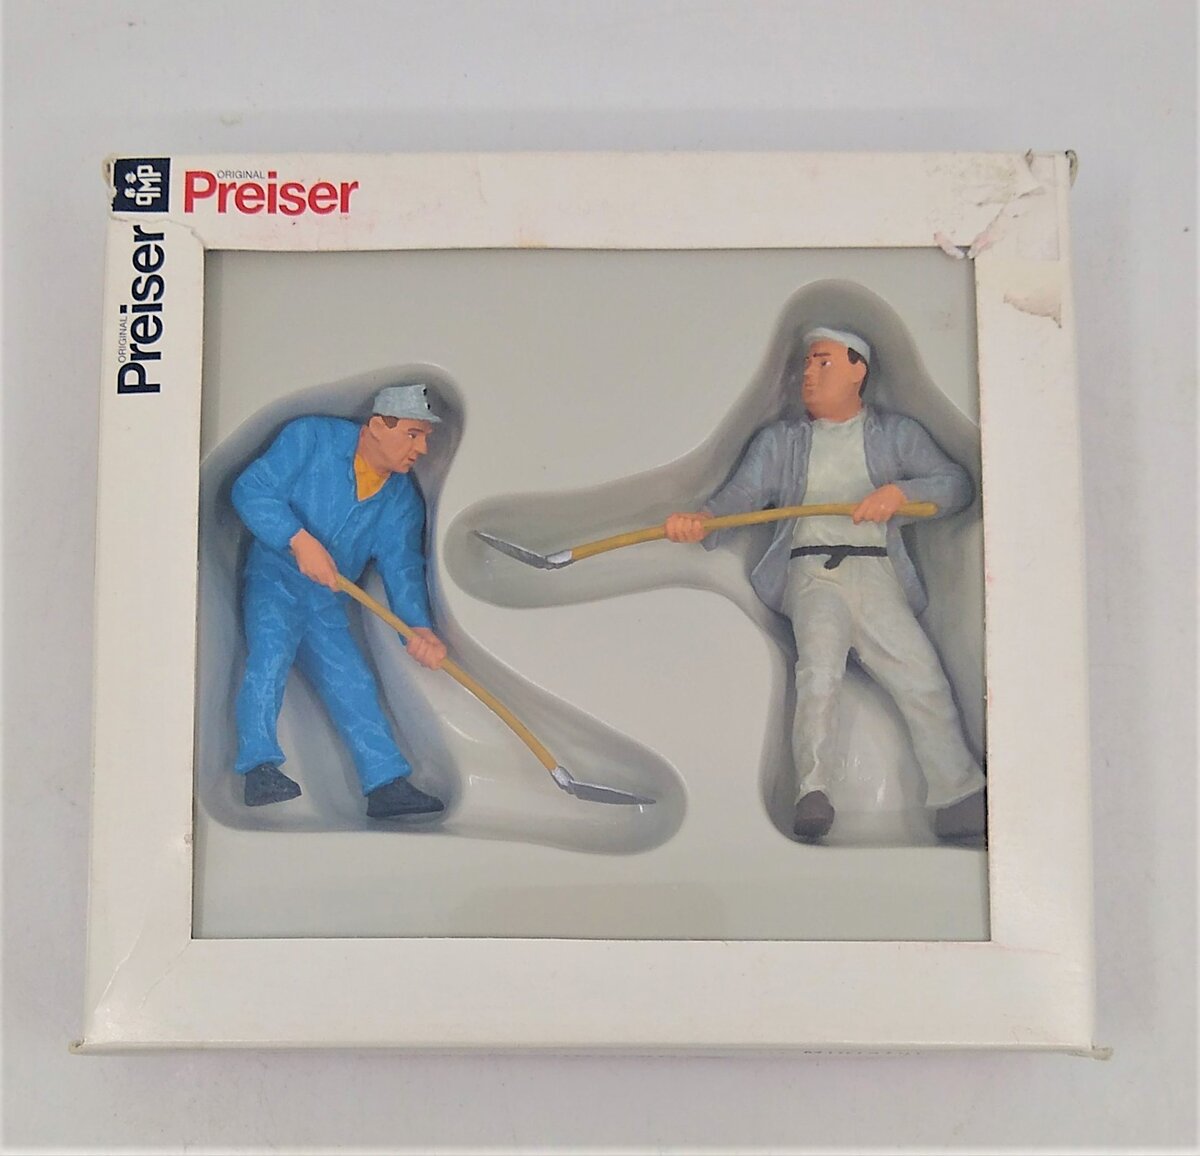 Preiser 45023 G Construction Workers Figures with Shovels (Set of 2)